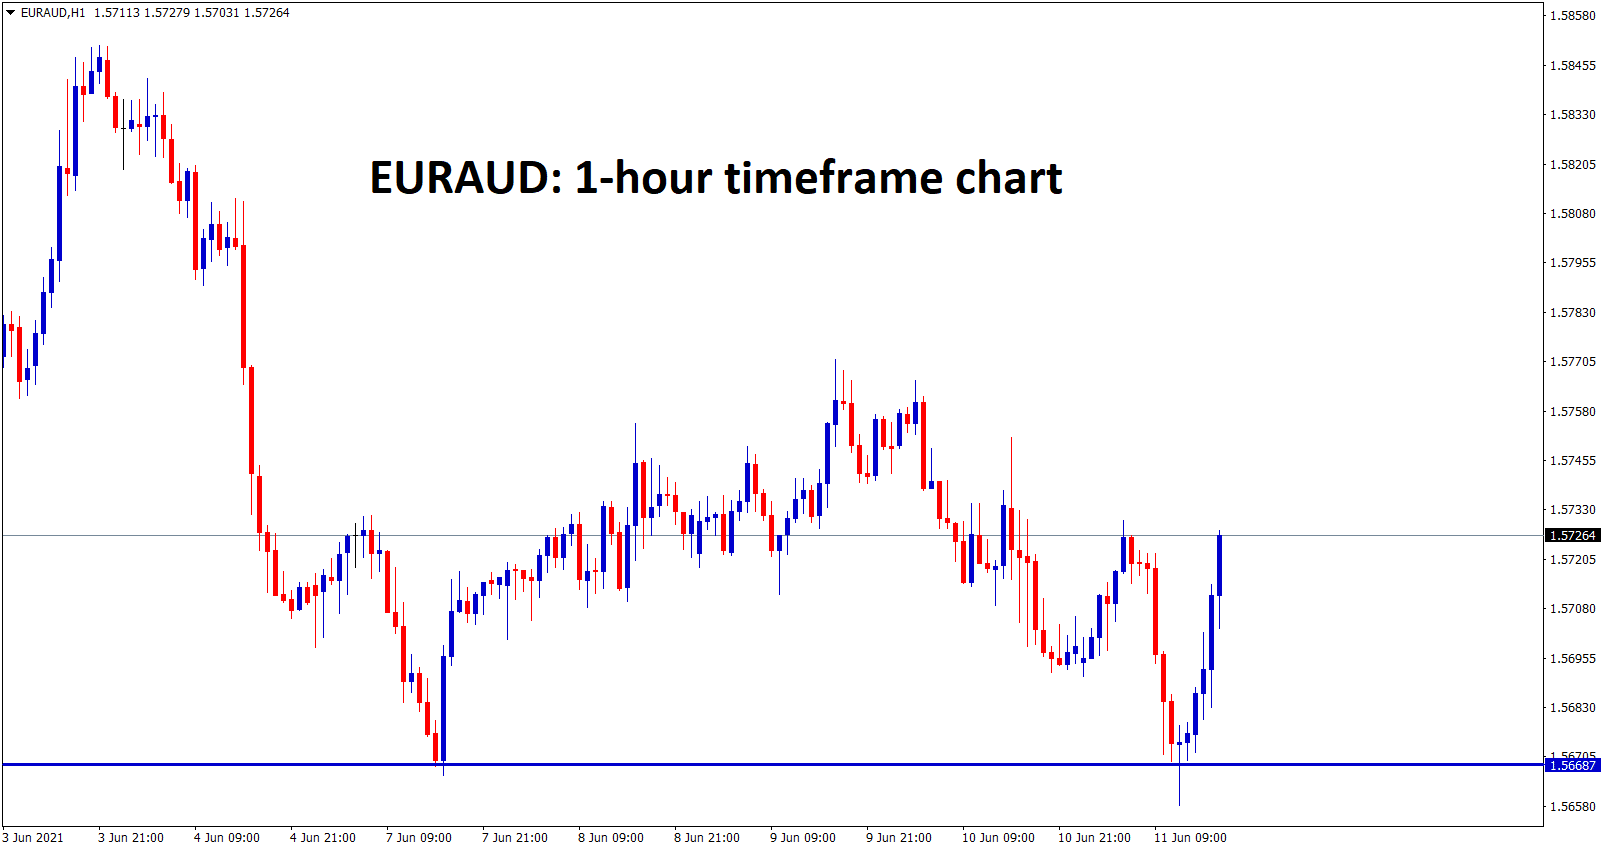 EURAUD formed a double bottom in the 1 hour timeframe chart